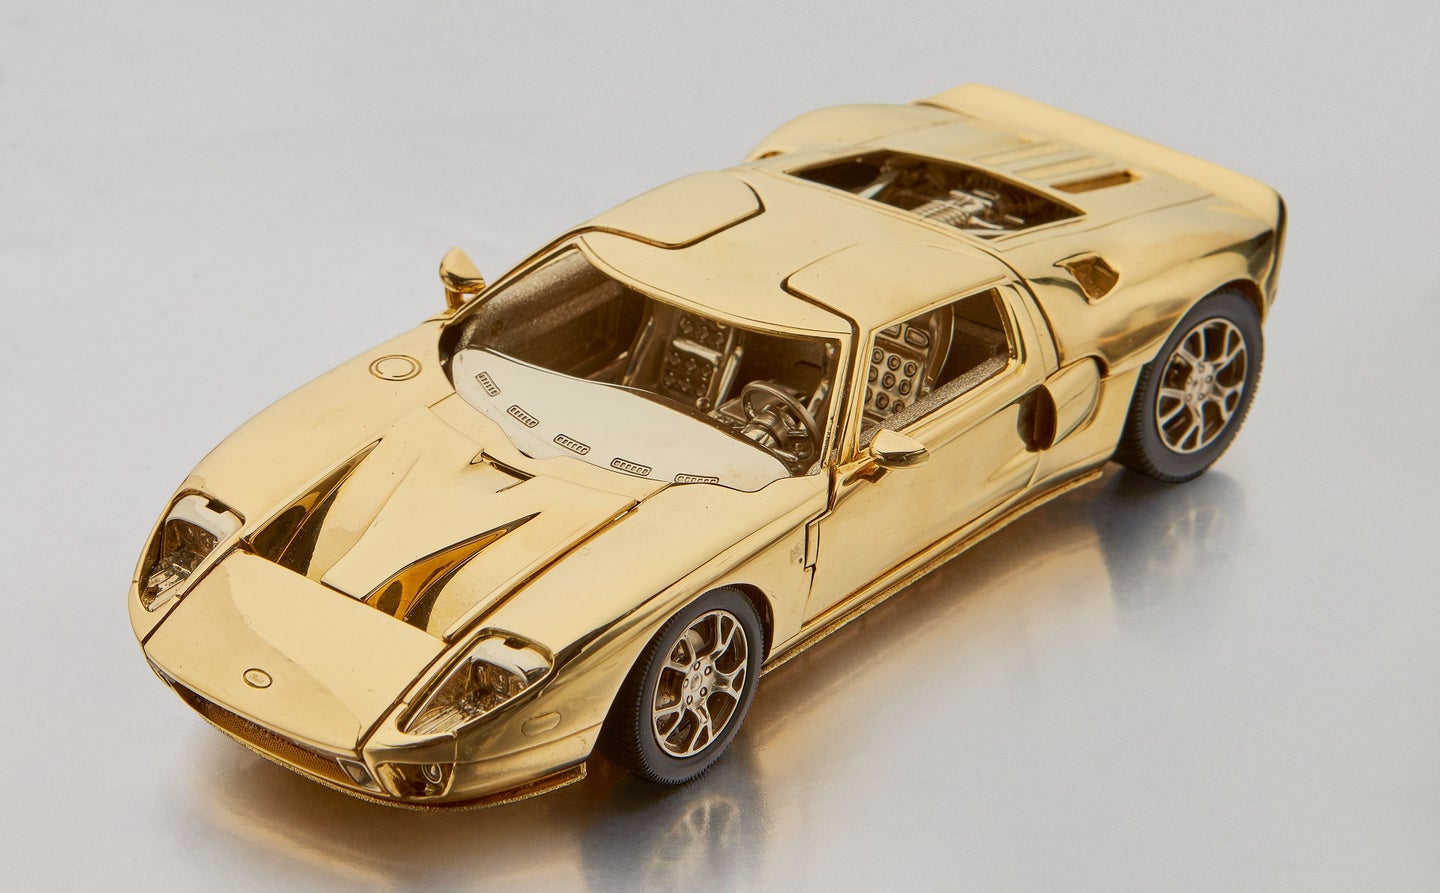 Christmas Gift Shopping? Here’s a 2006 Ford GT Made Out of Solid Gold